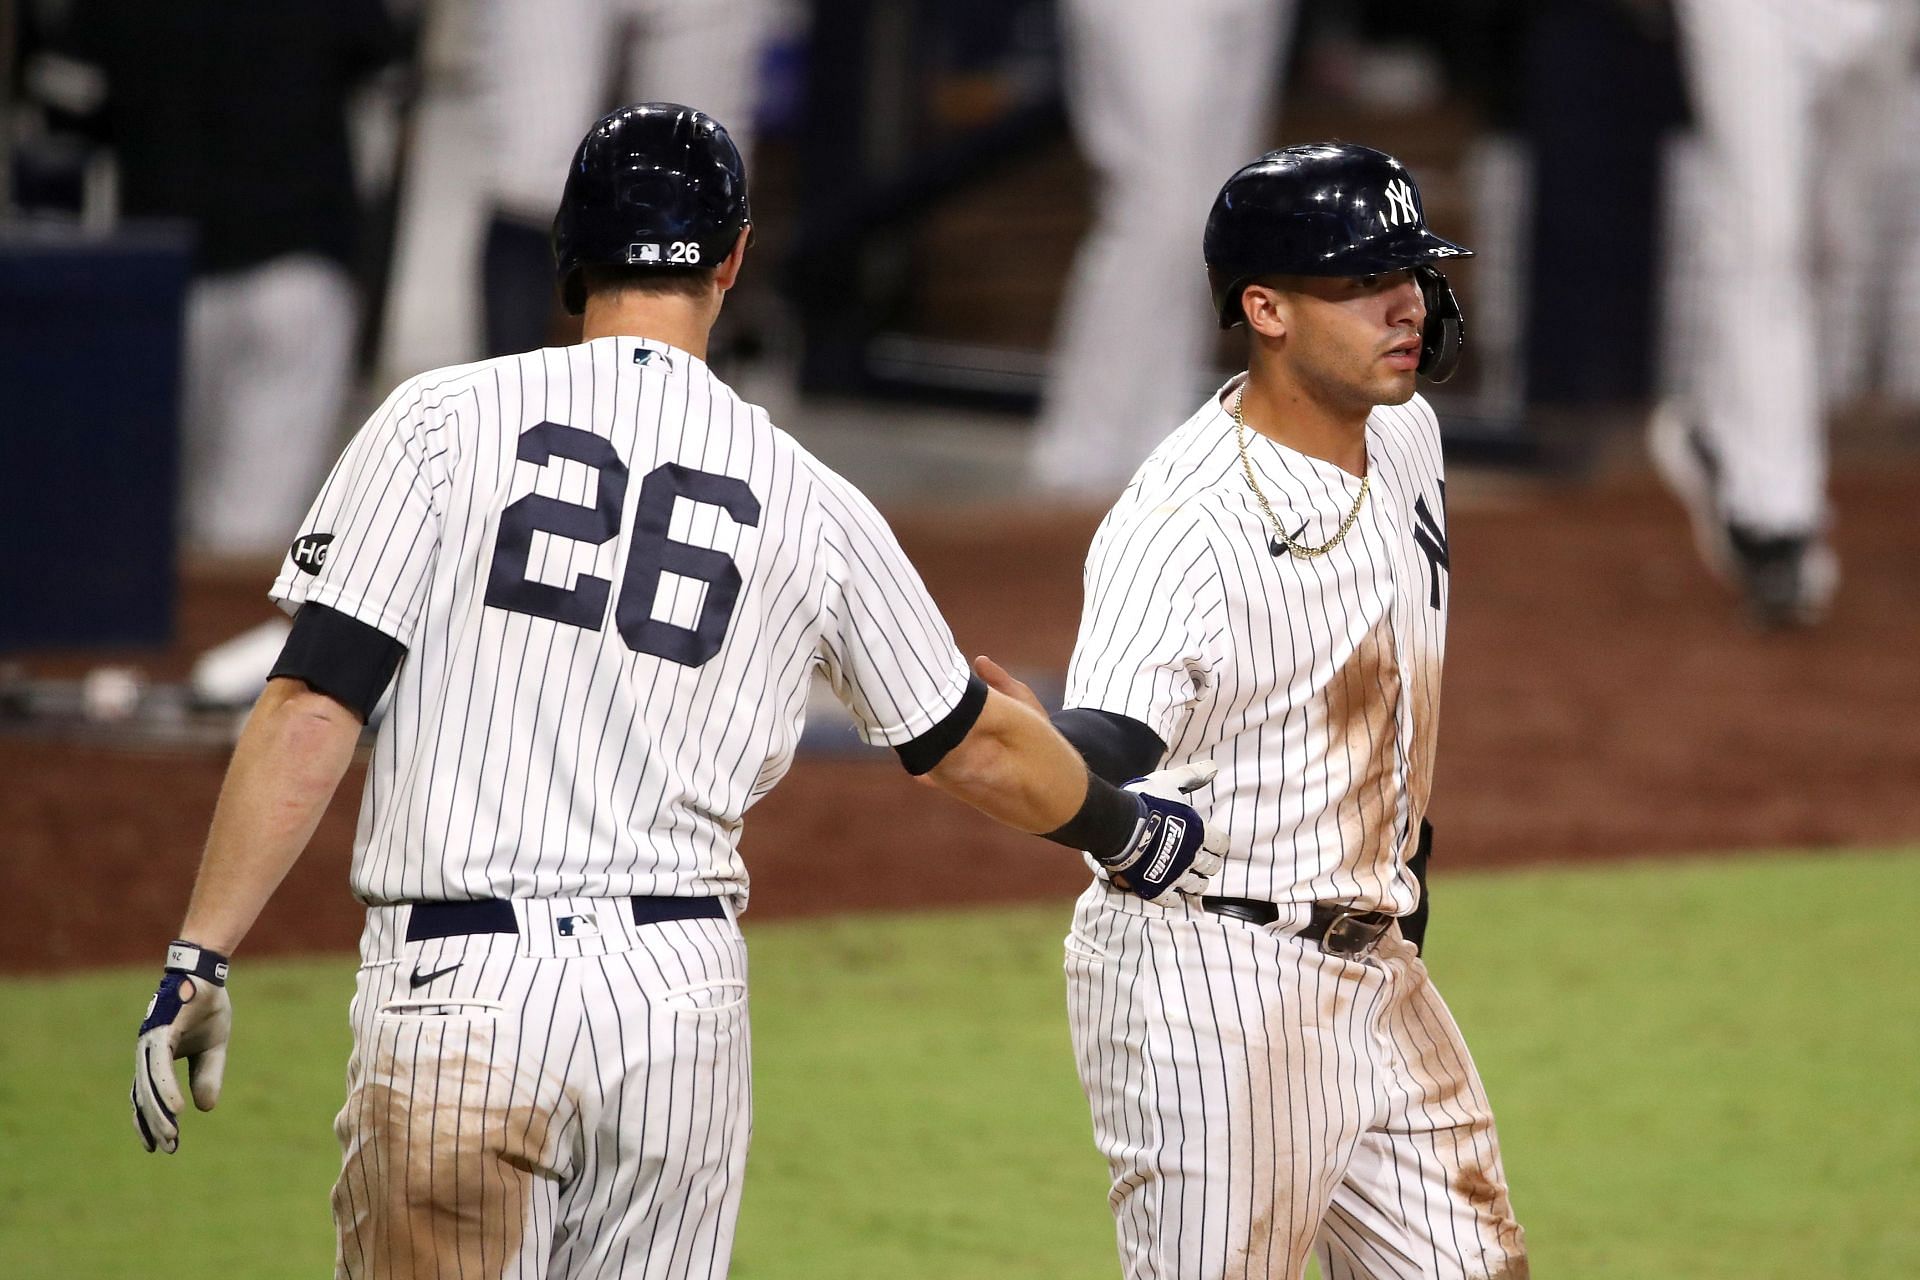 Will Dj LeMahieu or Gleyber Torres play second base?